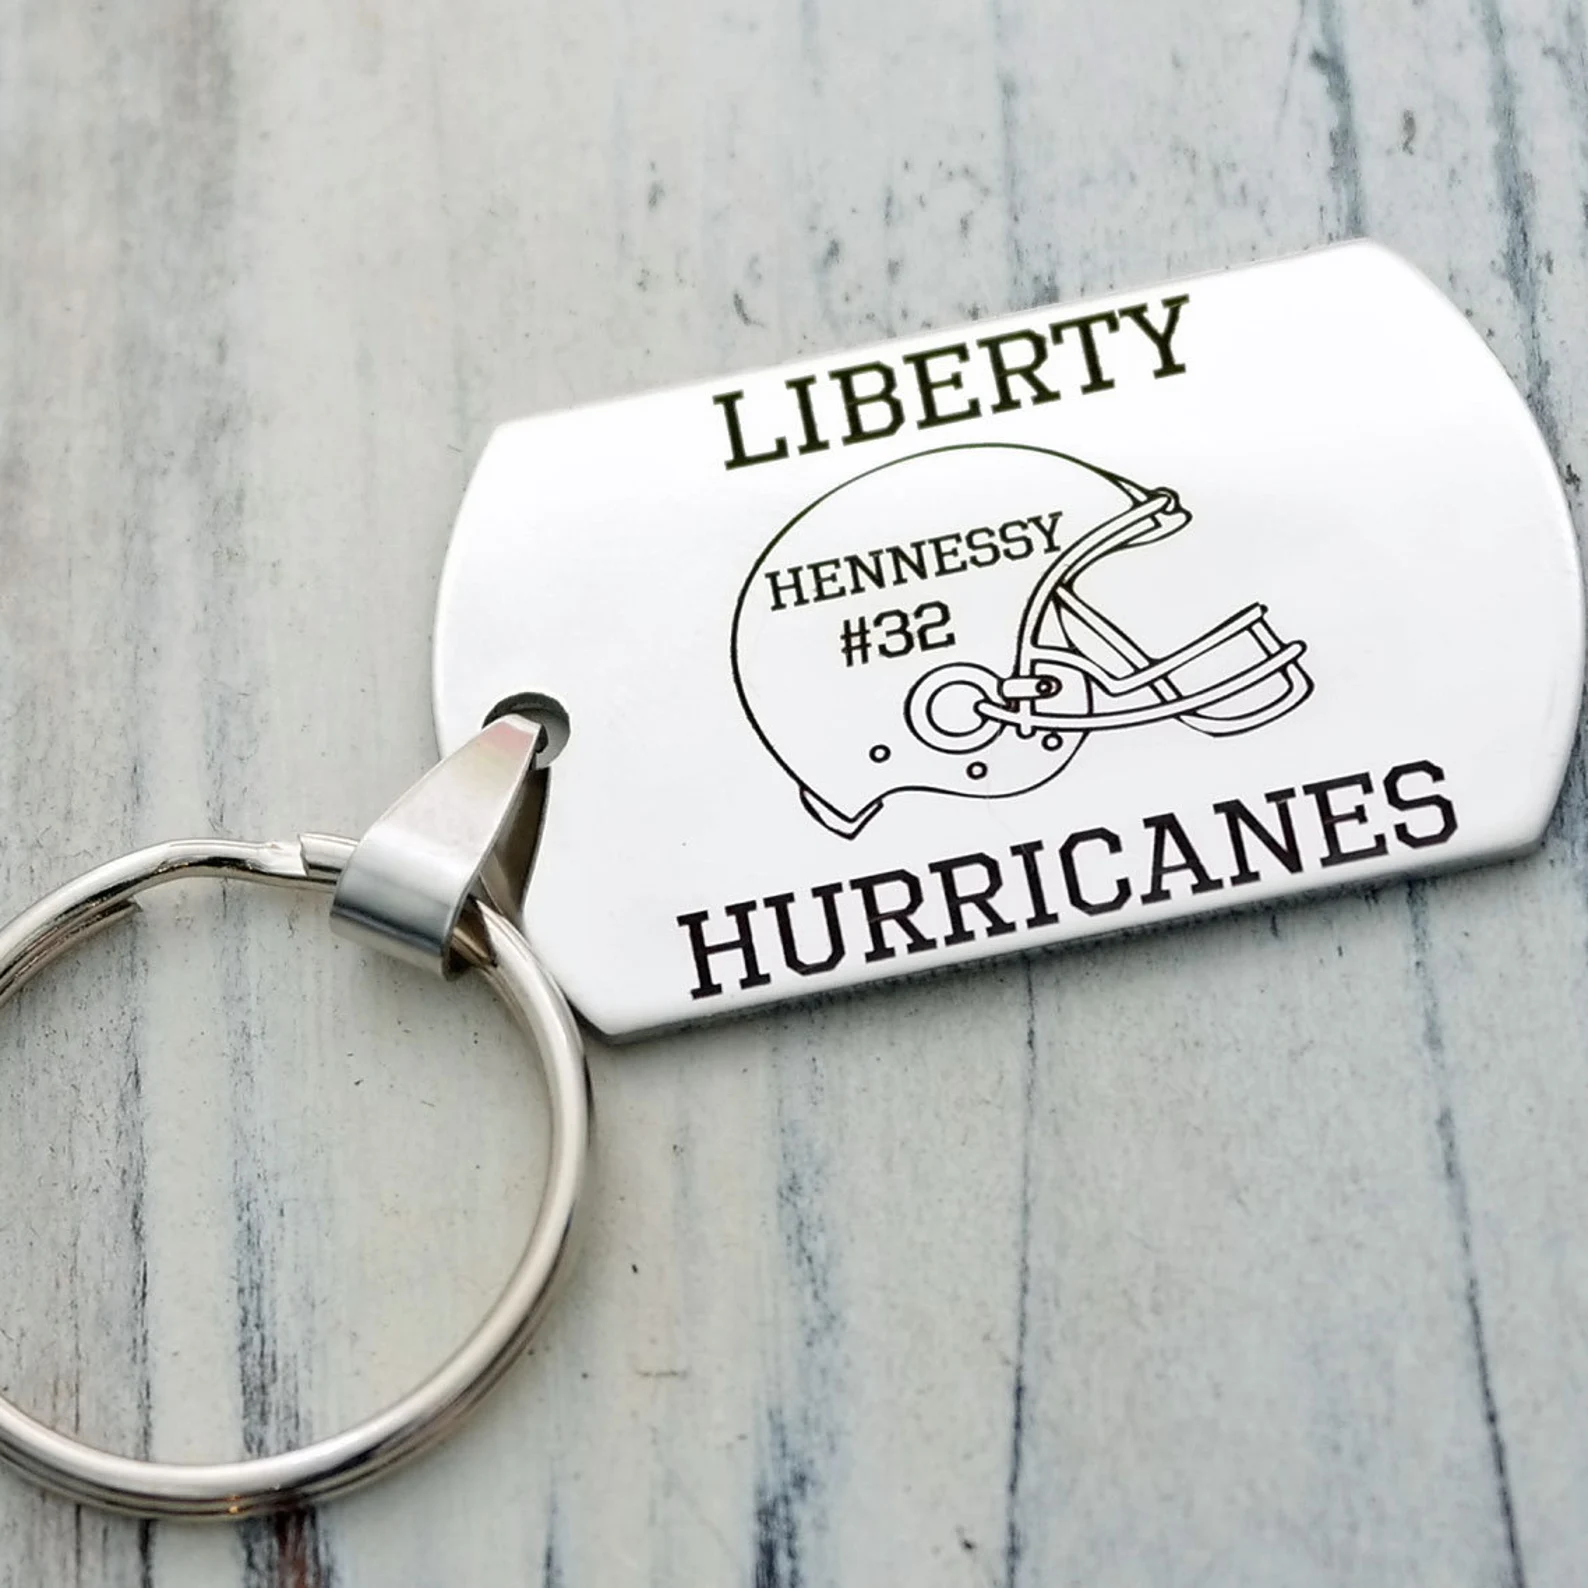 The best football gifts don't have to be expensive! Consider a football keychain or mug.